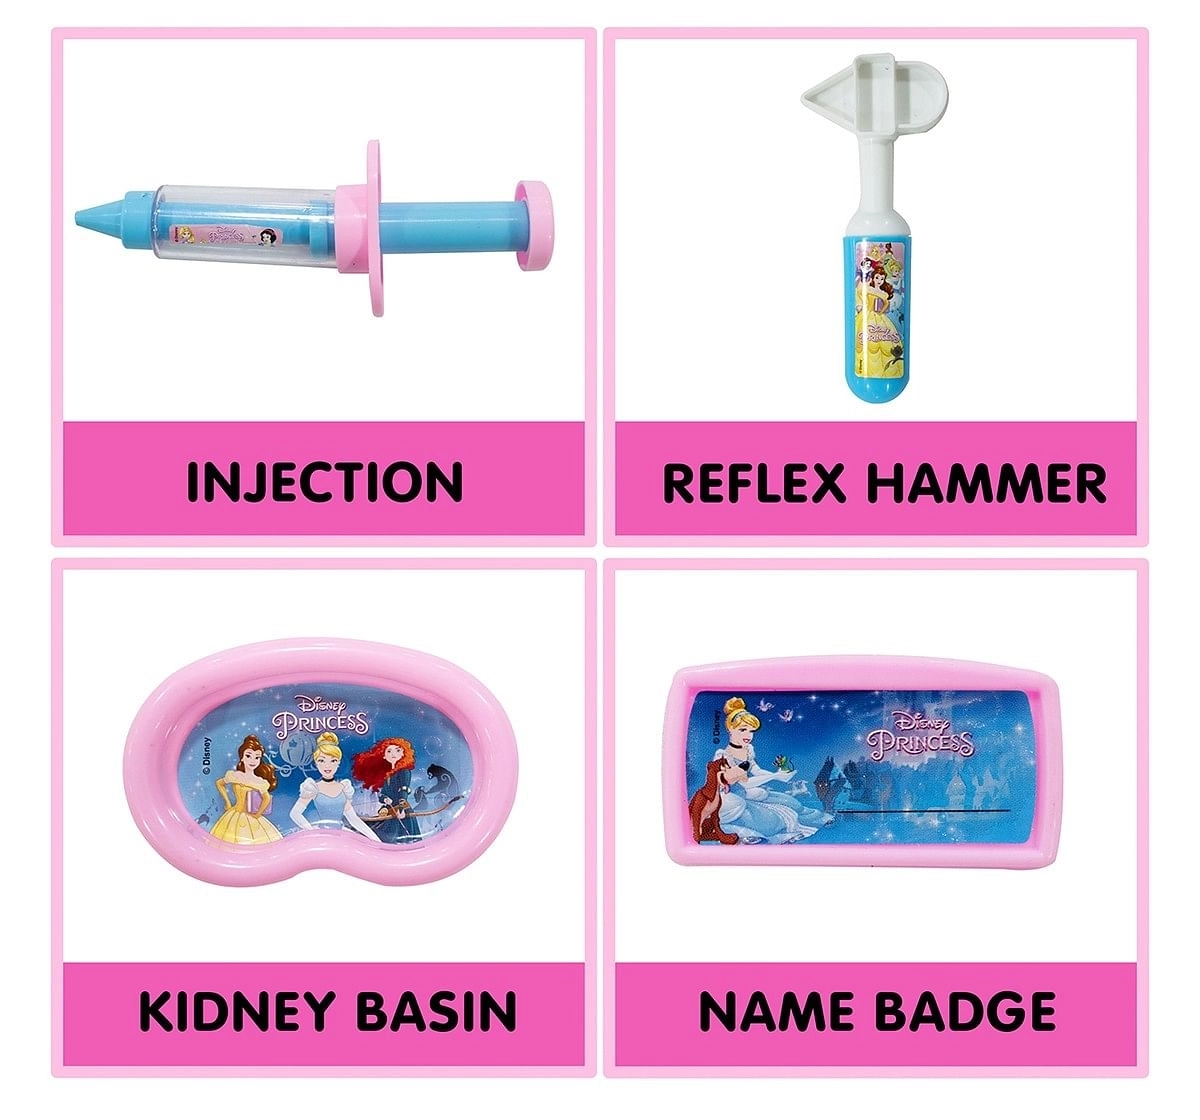 Disney Princess Doctor Set Role play toys for kids, 3Y+